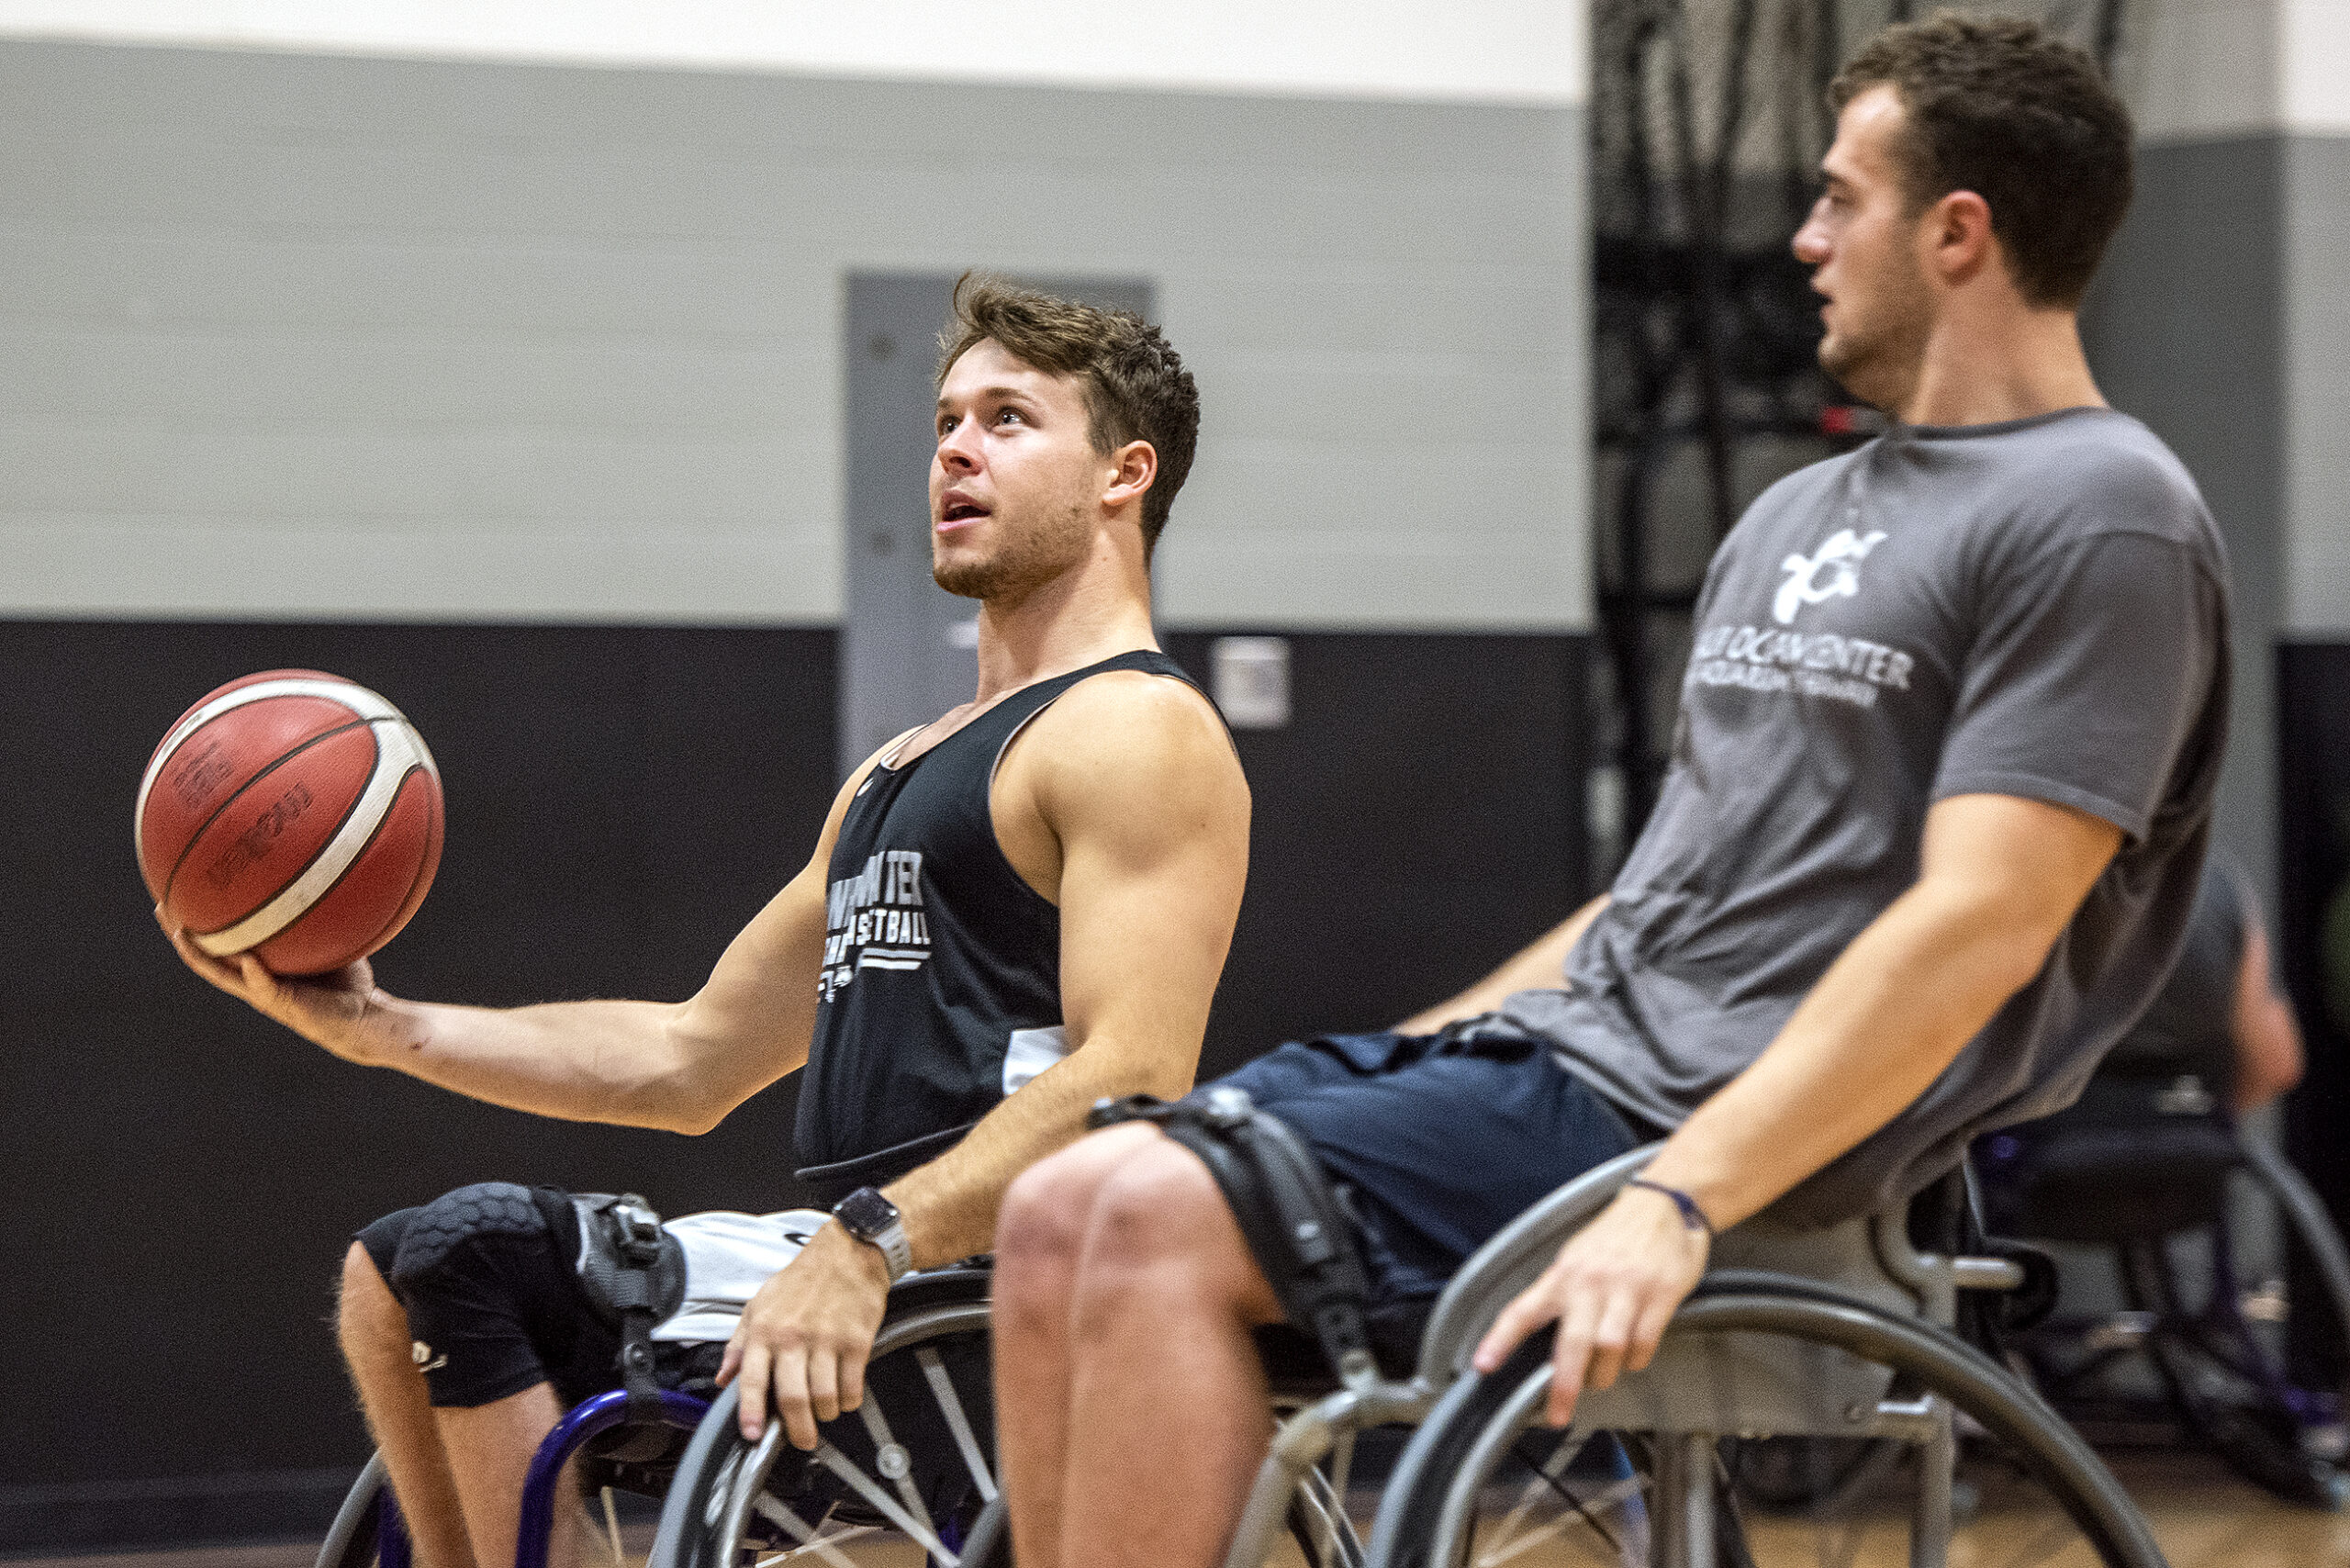 UW-Whitewater has sights set on 3-time gold at upcoming Paralympics